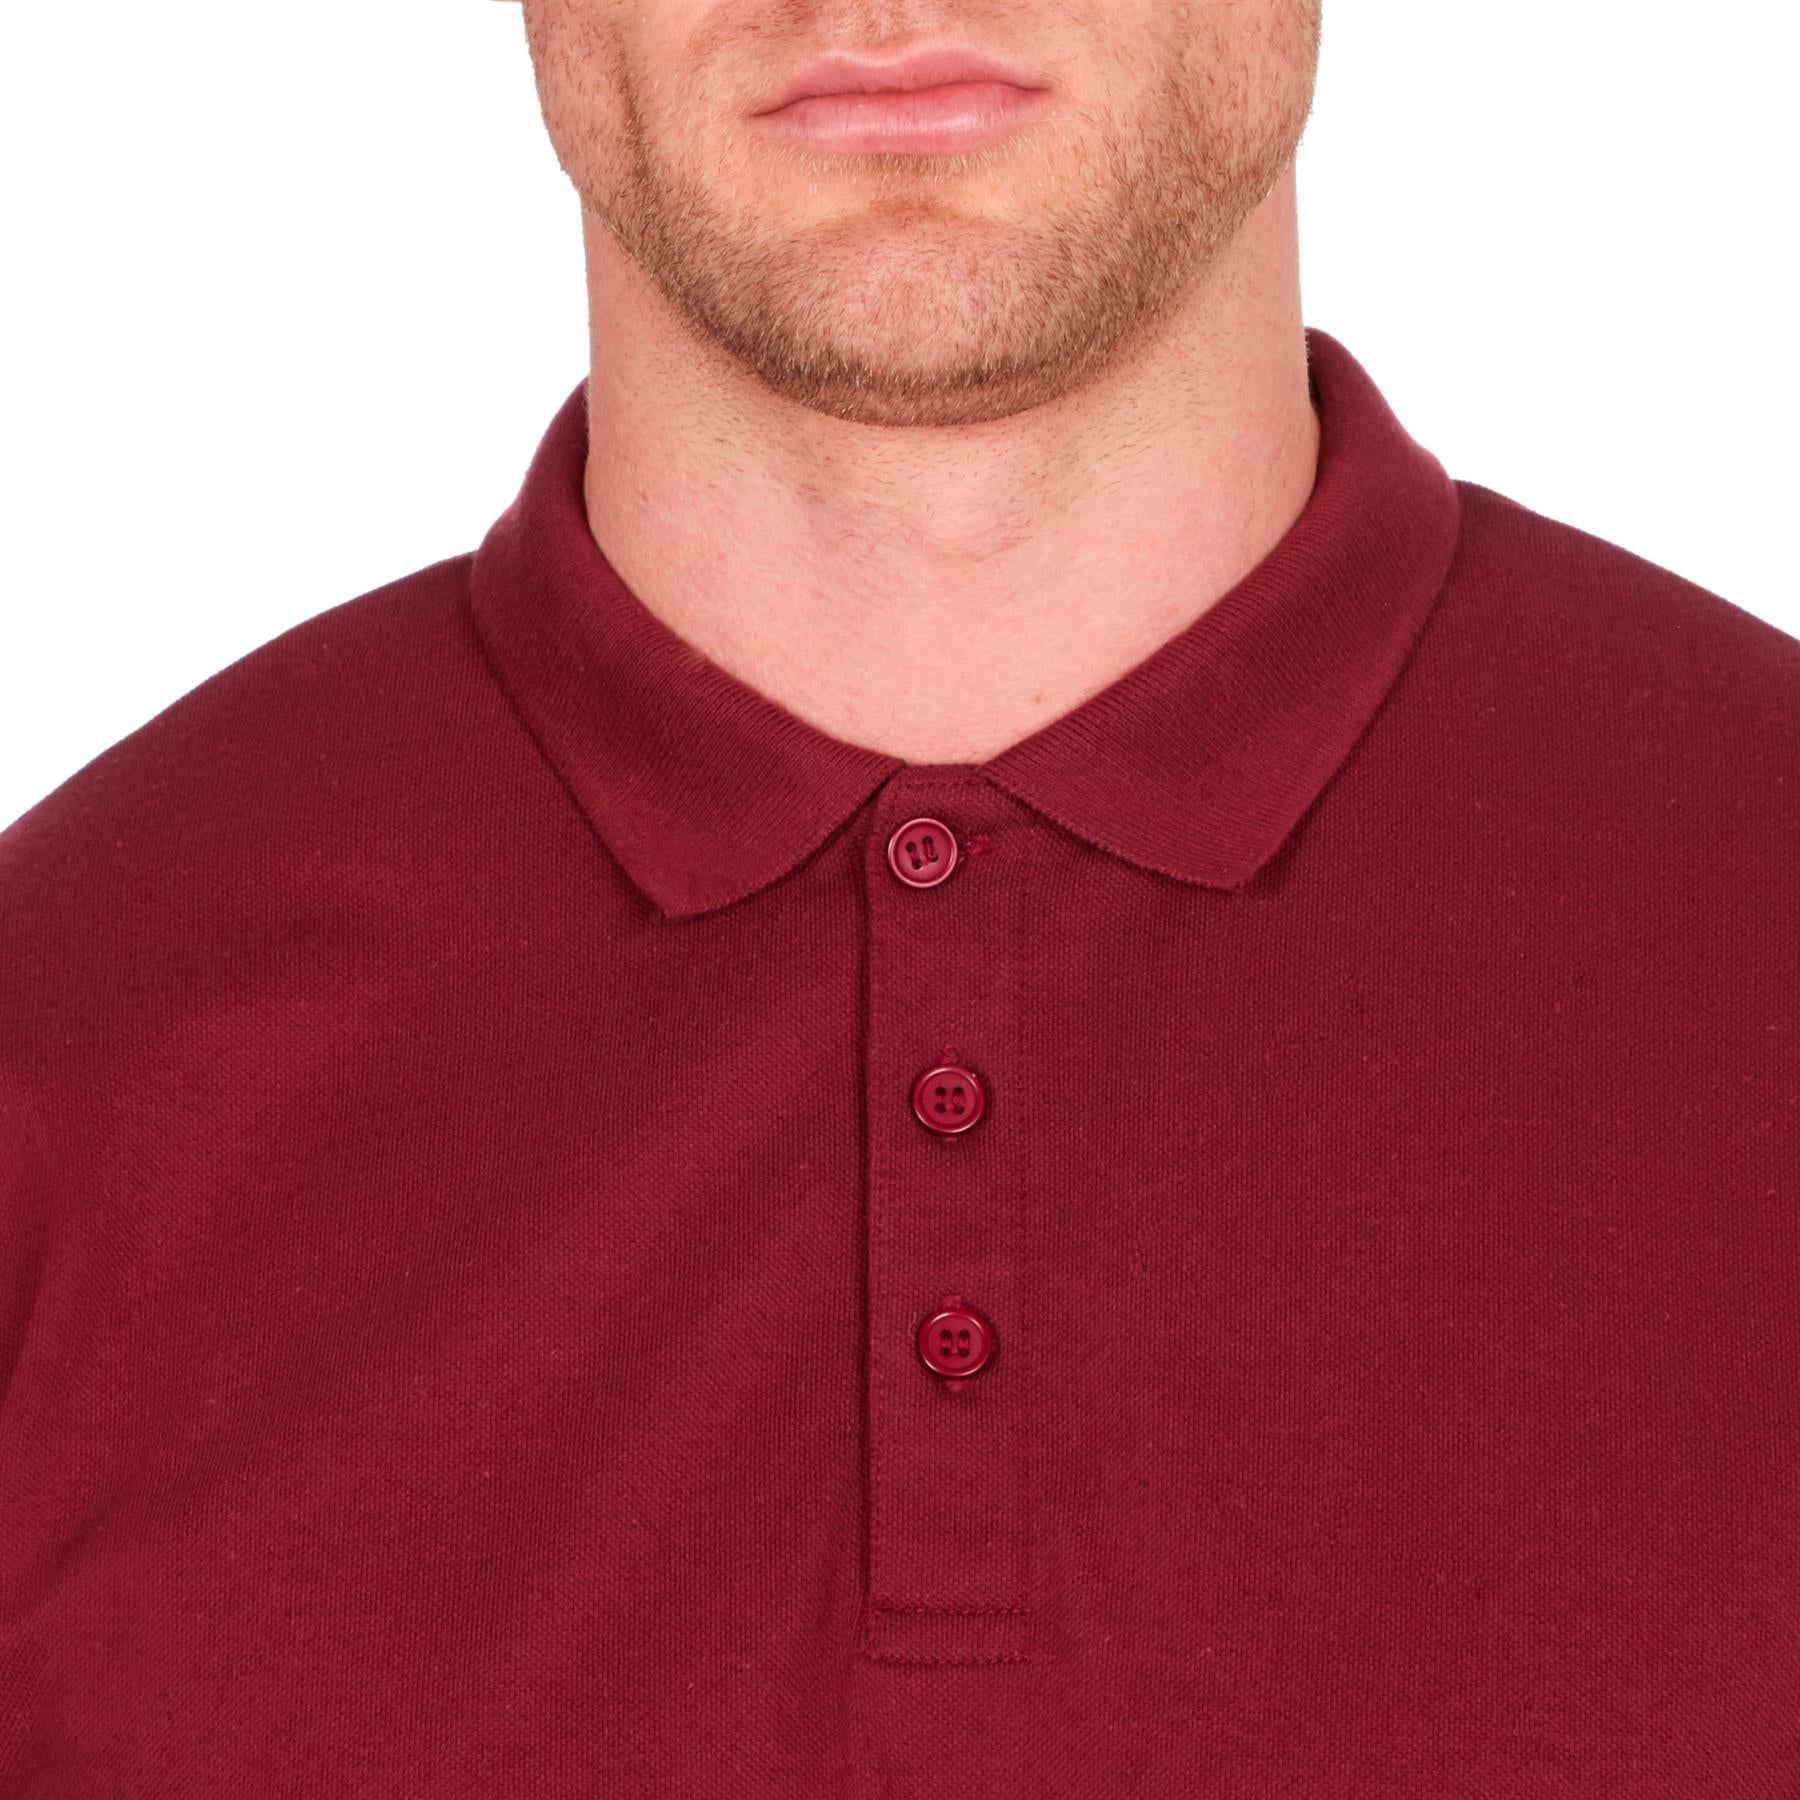 Red Short Sleeve Polo T-Shirt